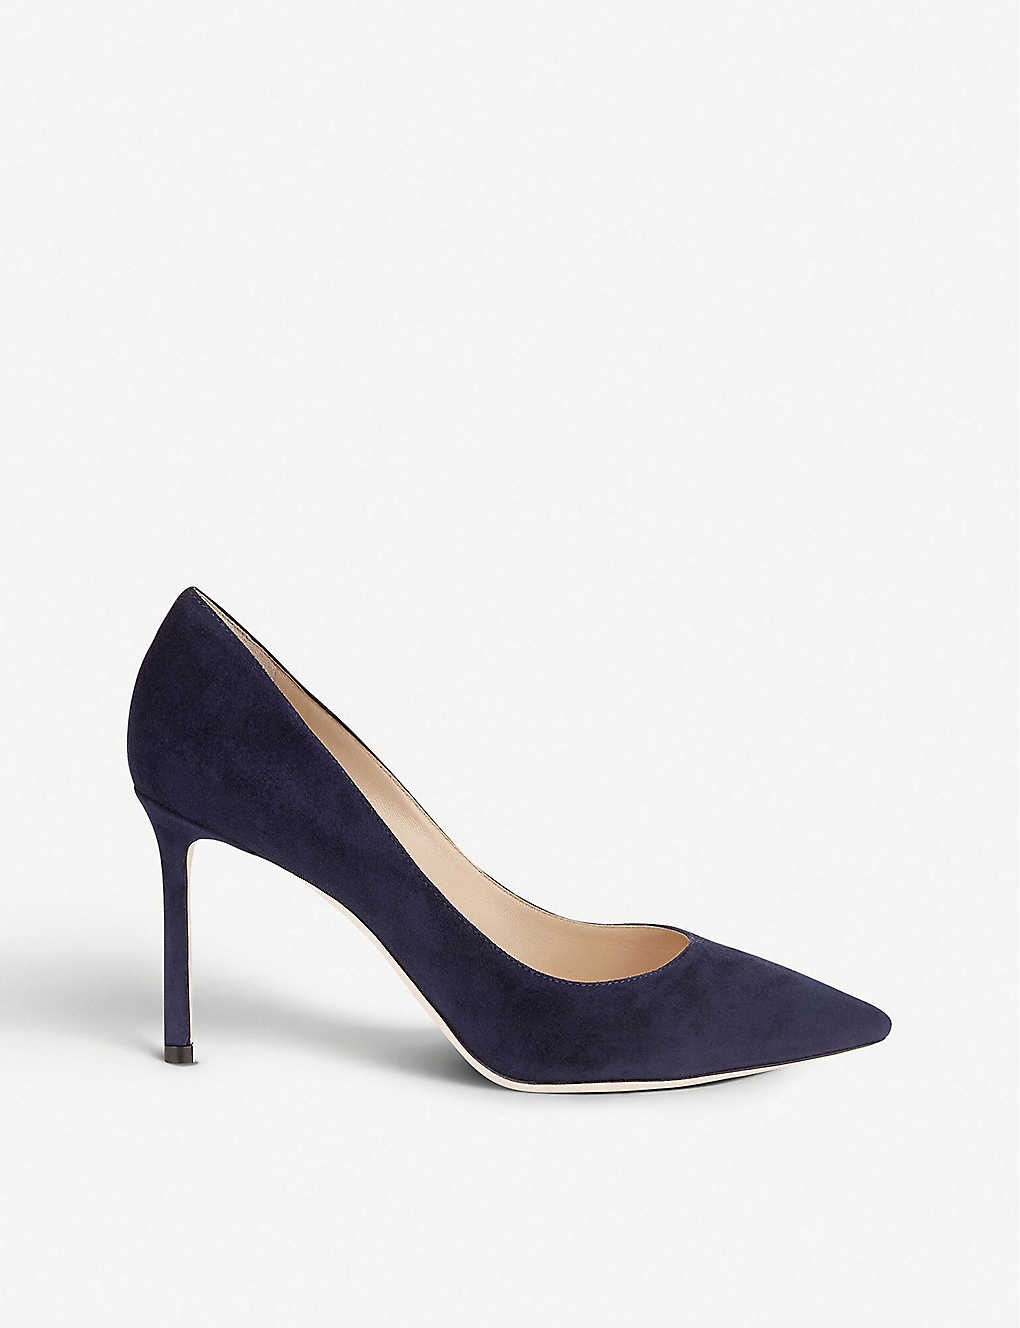 Romy 85 suede courts - 1